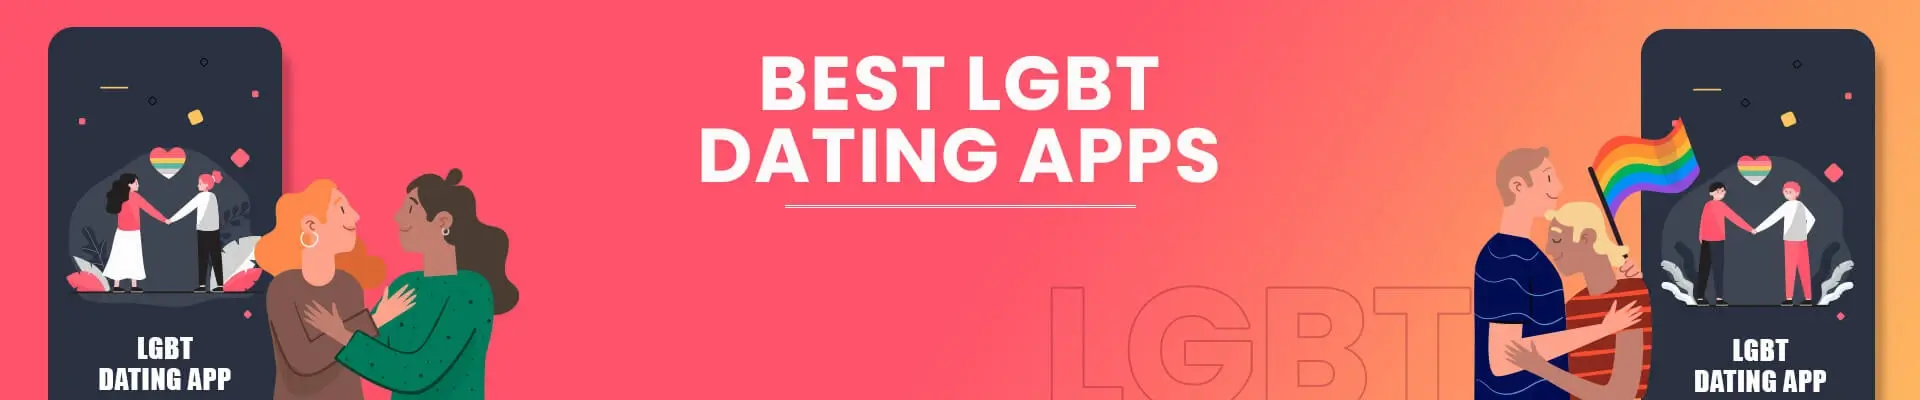 8 Best LGBT Dating Apps in 2021 For The LGBTQ Community